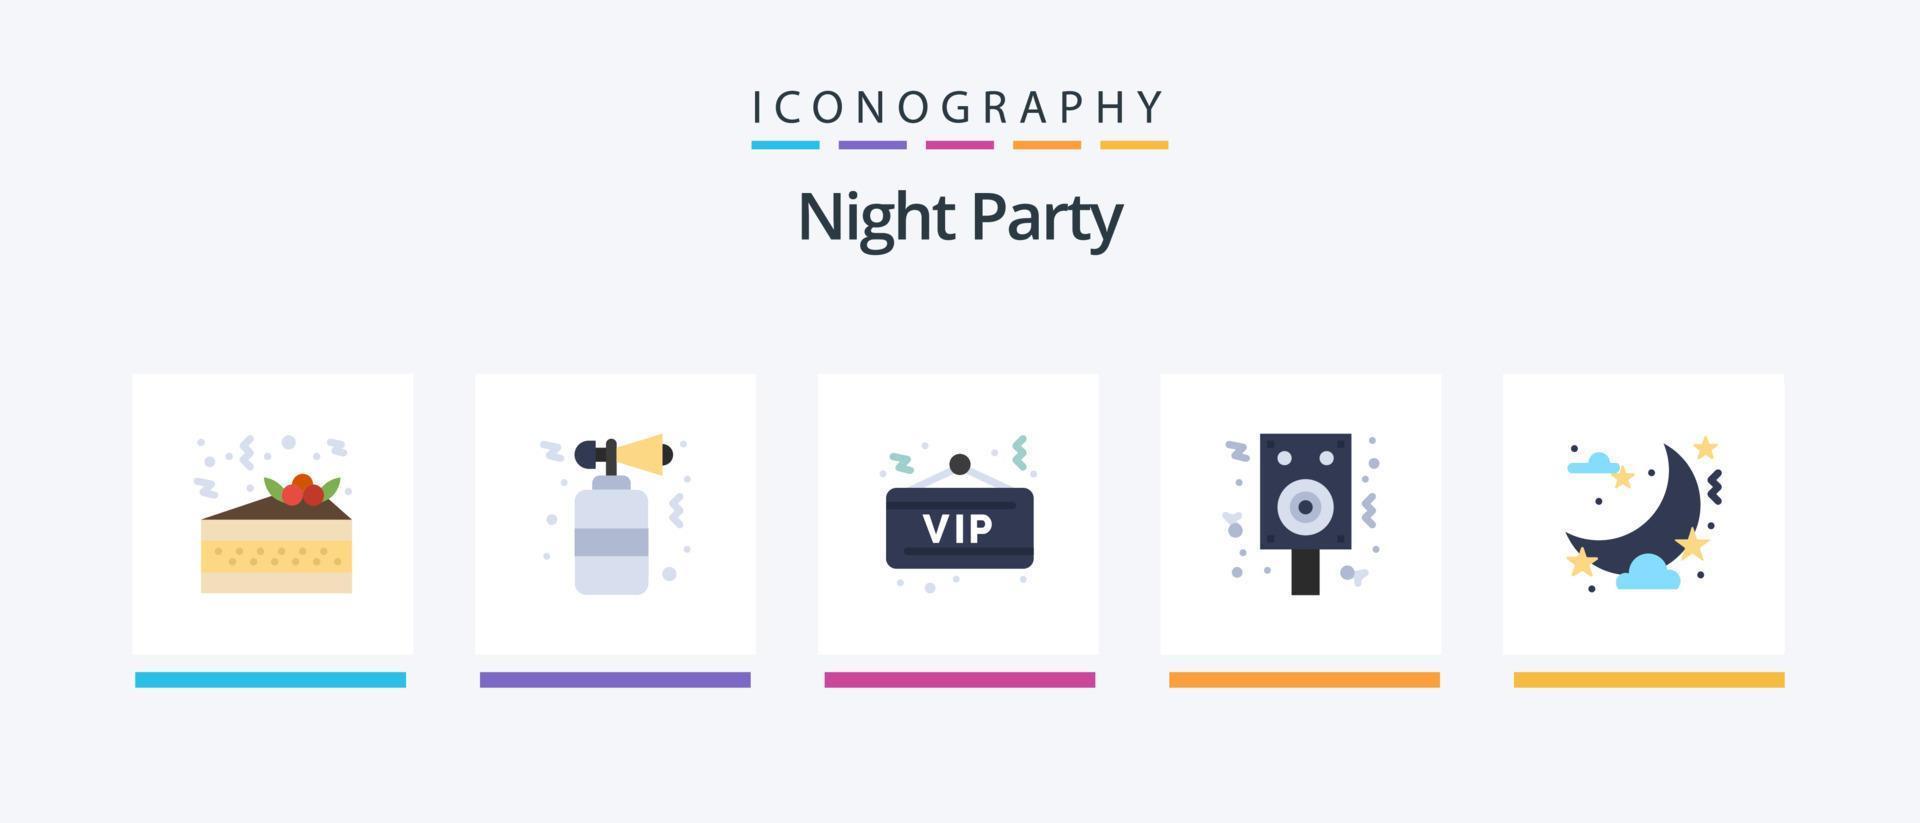 Night Party Flat 5 Icon Pack Including party. celebration. board. party. celebration. Creative Icons Design vector